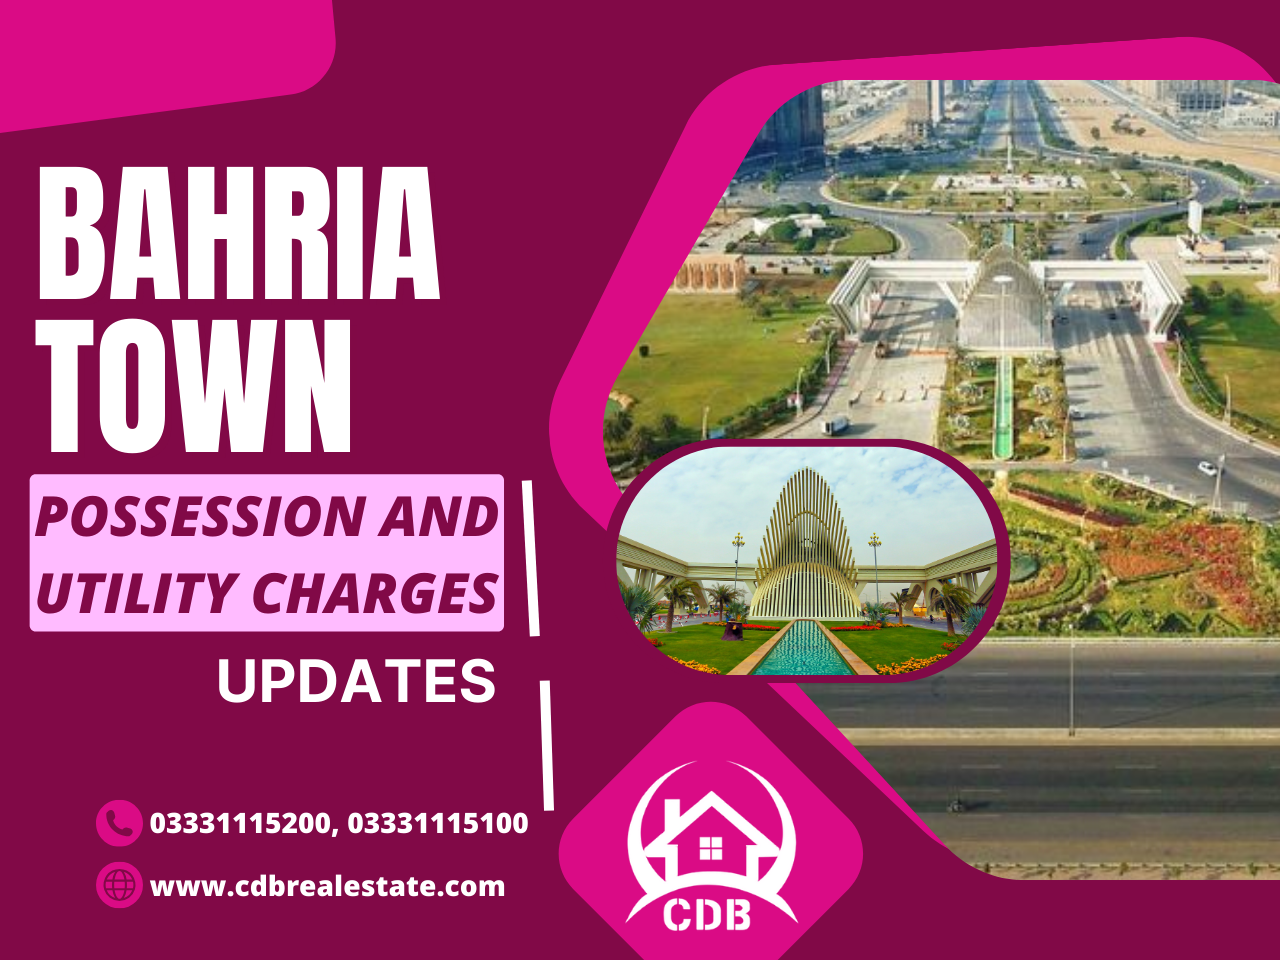 Bahria Town Possession and Utility Charges